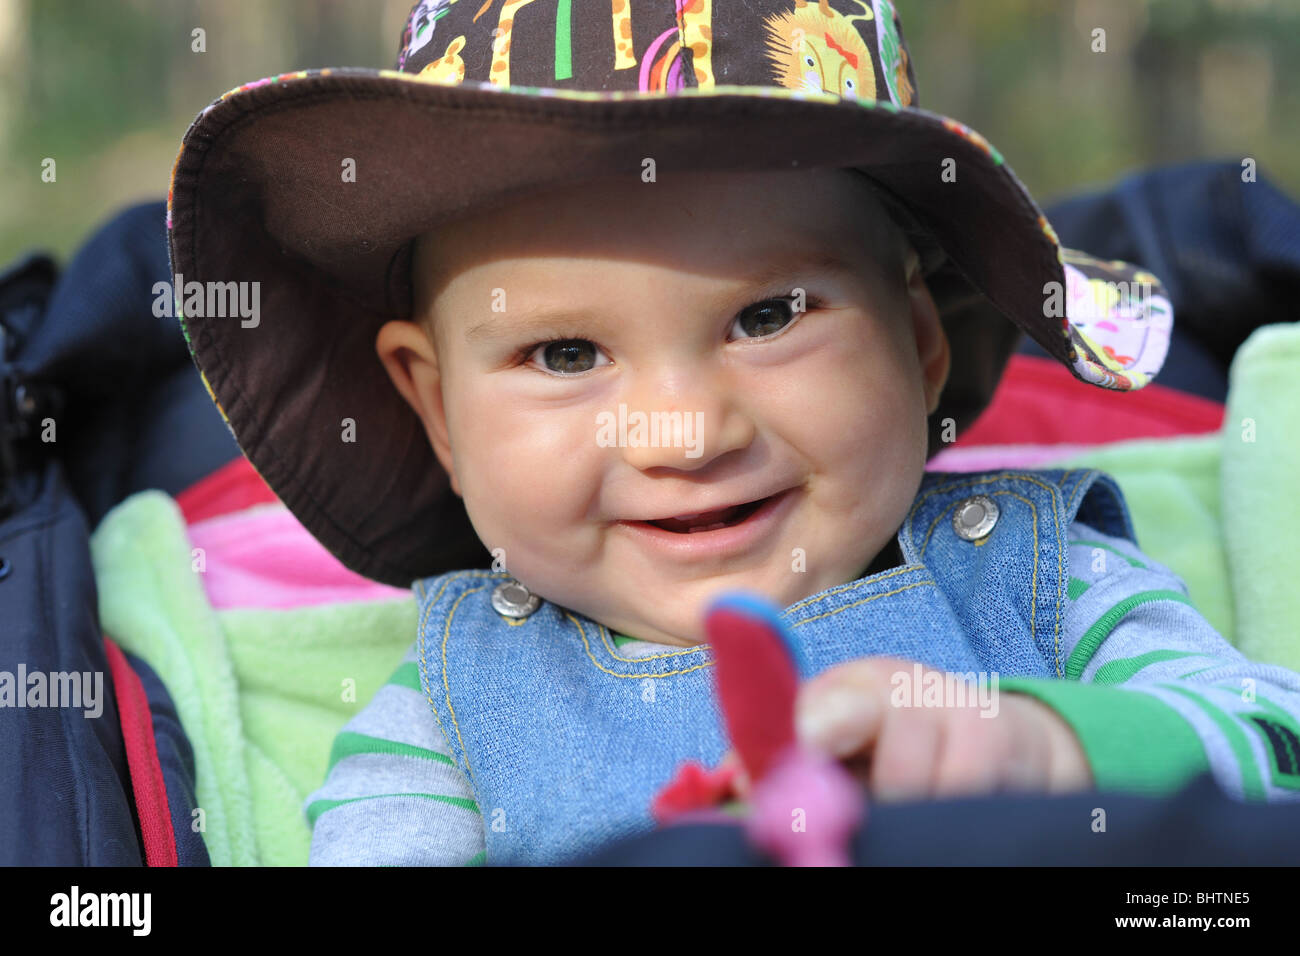 SMILING BABY WEARING A HAT Stock Photo